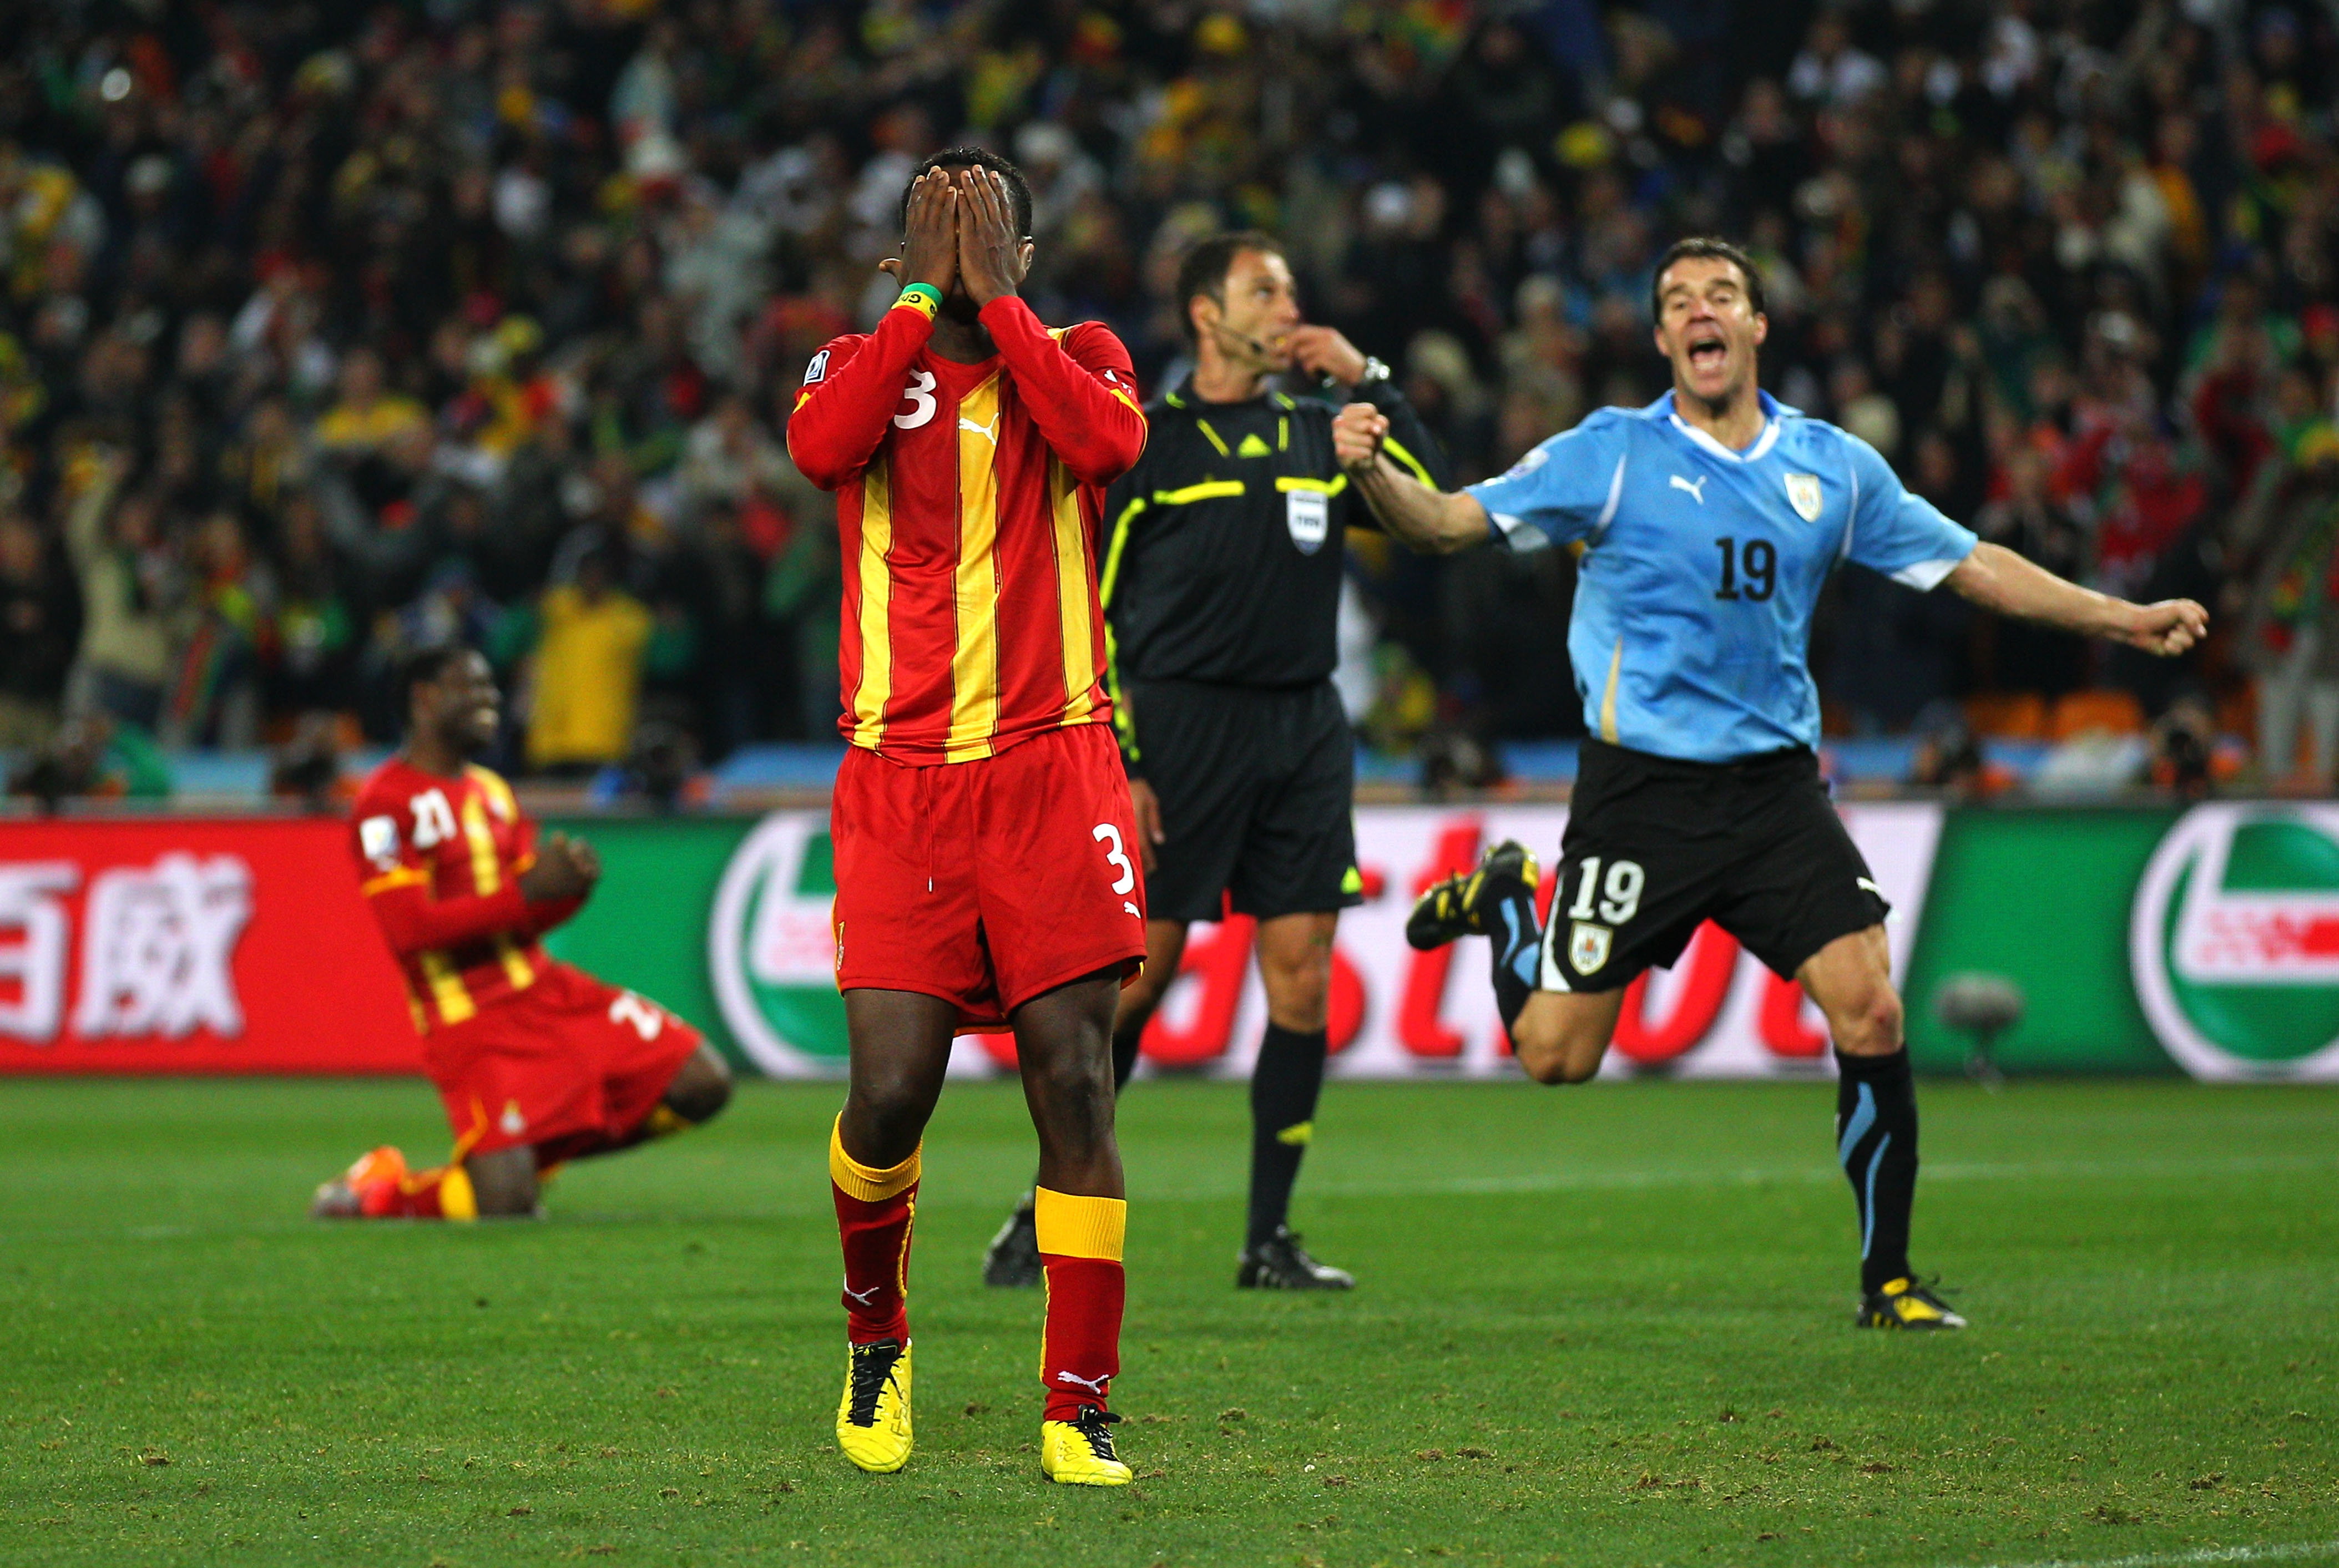 JOHANNESBURG, SOUTH AFRICA - JULY 02:  Asamoah Gyan of Ghana reacts as he misses a late penalty kick in extra time to win the match during the 2010 FIFA World Cup South Africa Quarter Final match between Uruguay and Ghana at the Soccer City stadium on Jul